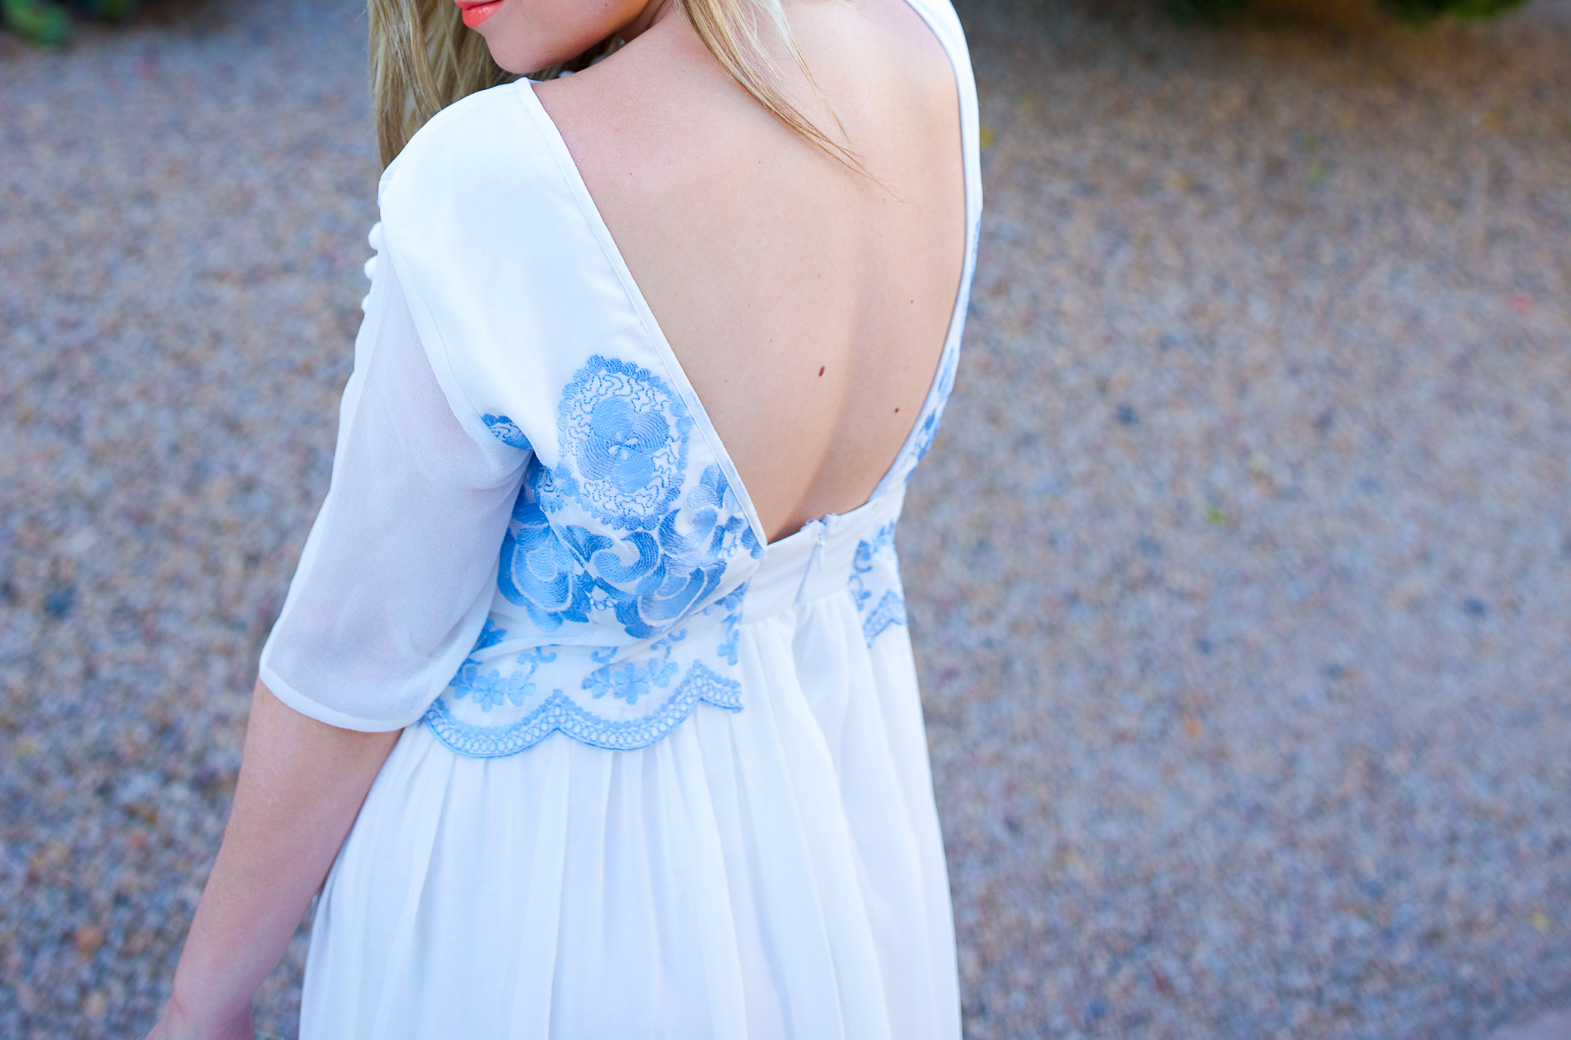 embroidered lace dress